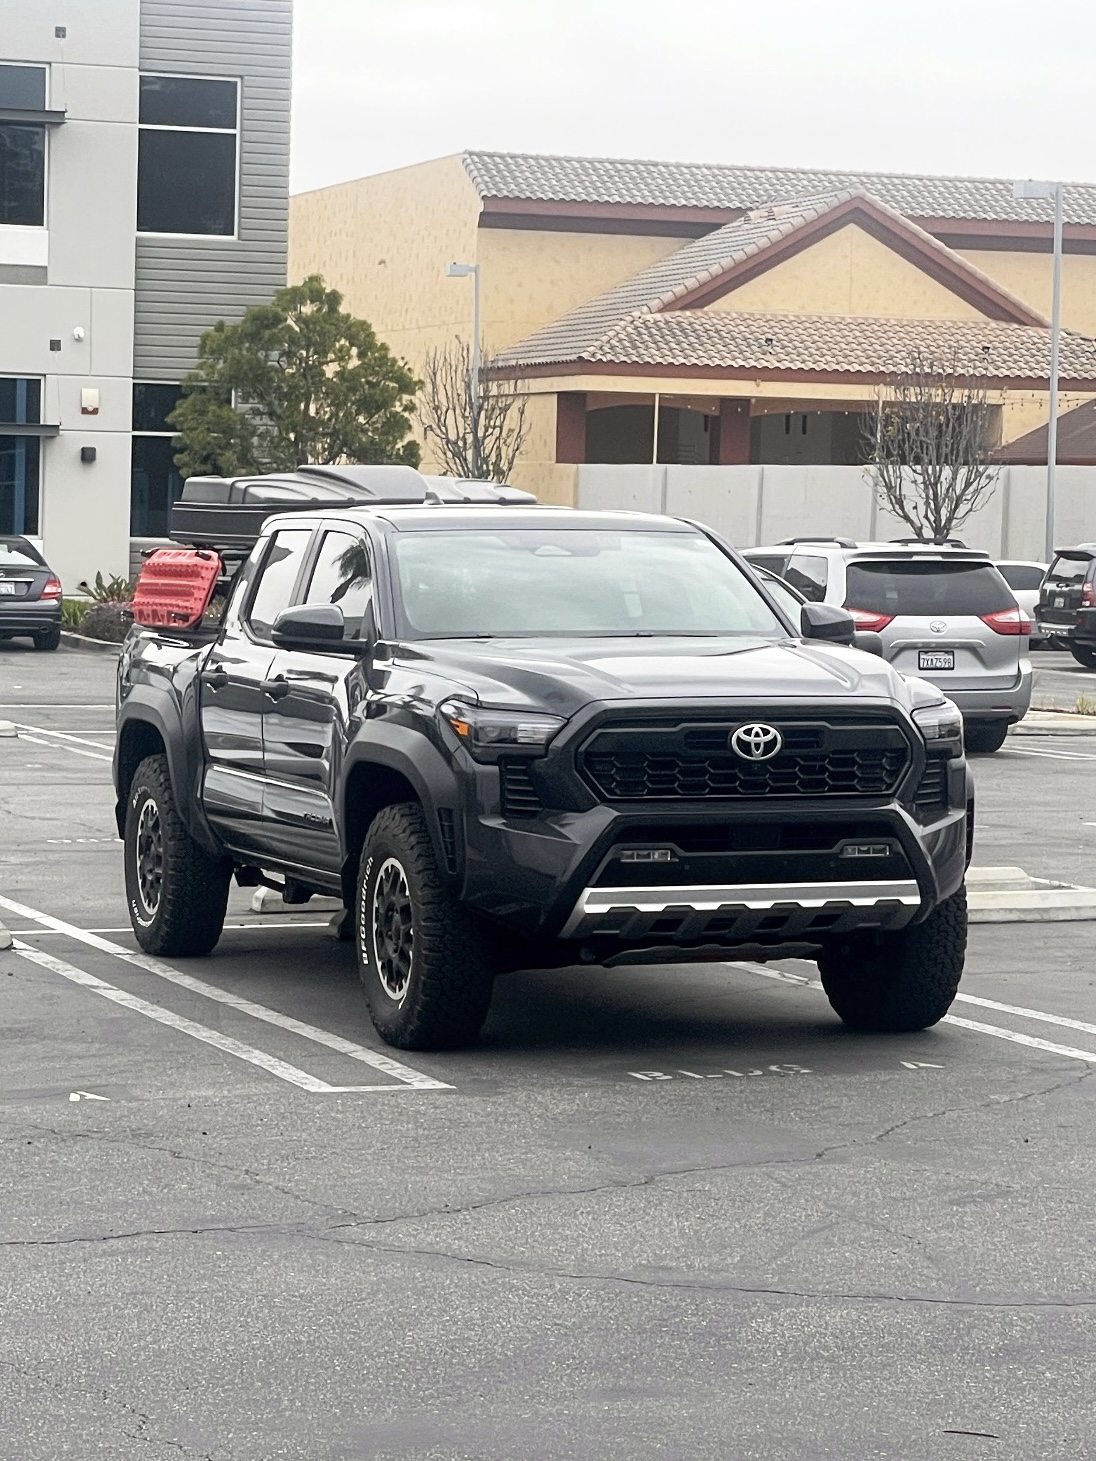 2024 Tacoma Black lower valance swapped with Trailhunter silver valence 6A317BB4-269D-42B0-A033-B5D45FF4D06A